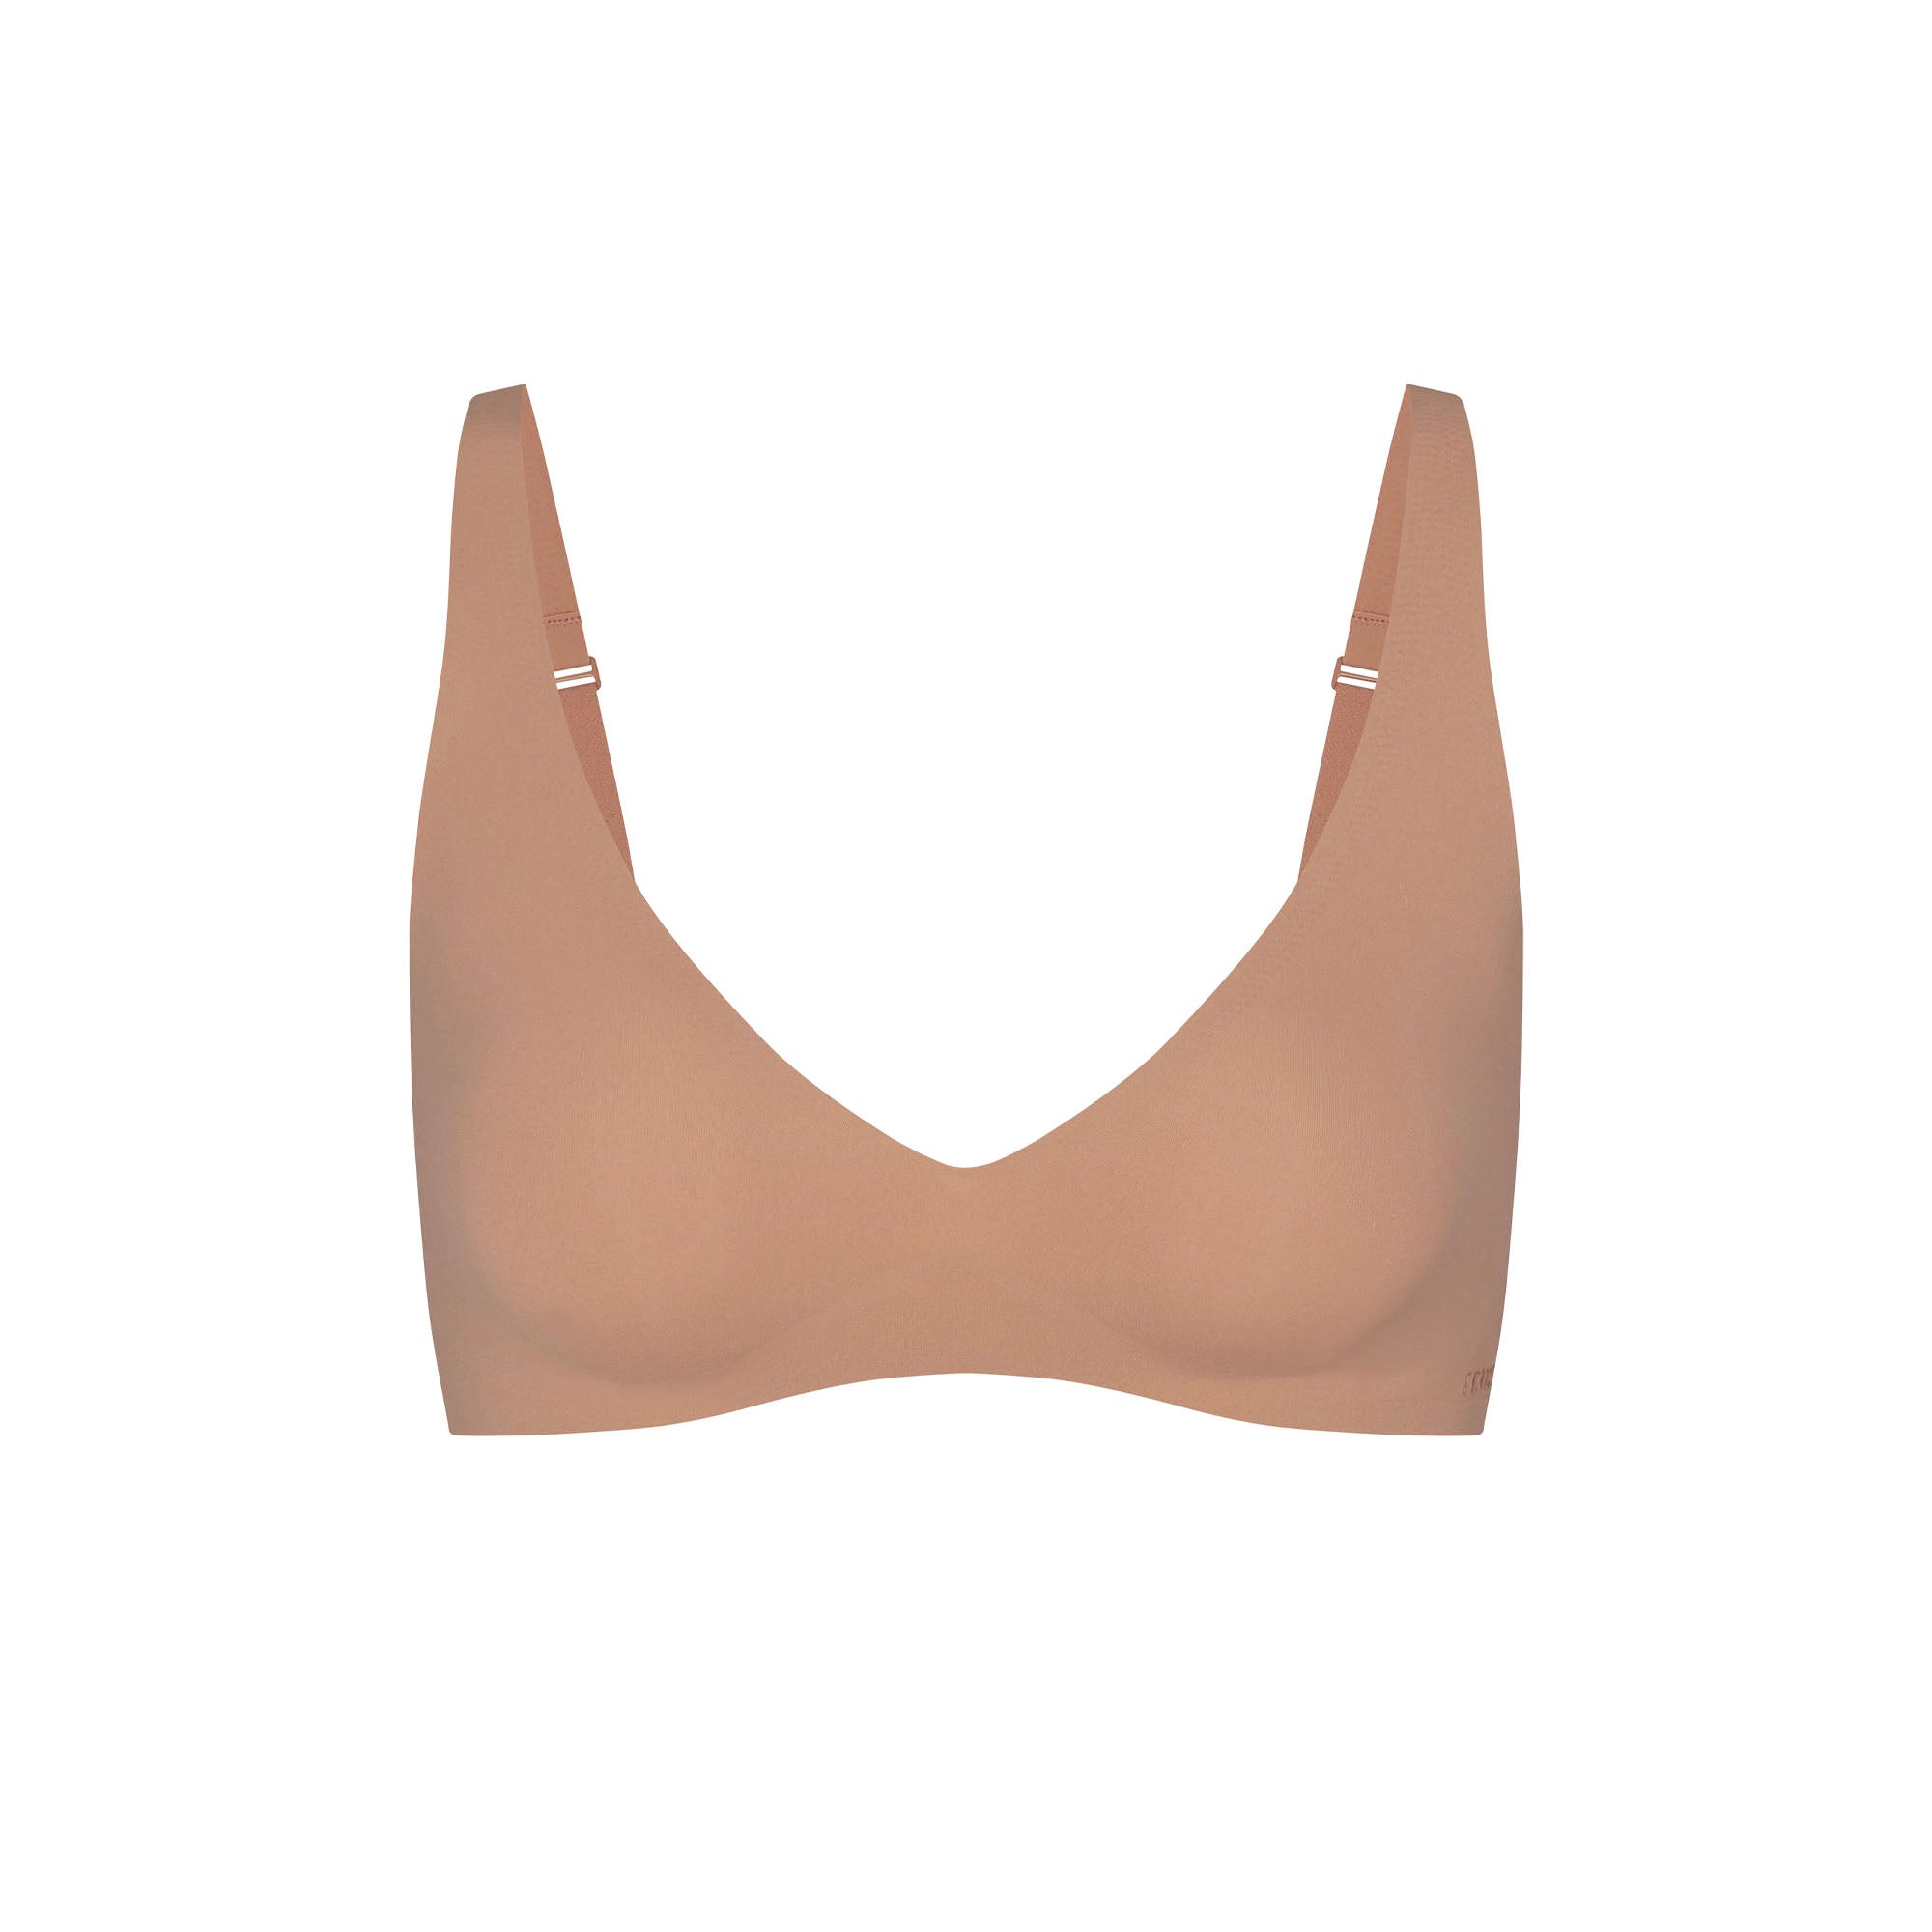 SKIMS - The Plunge Bralette ($36) in Mineral — available now in